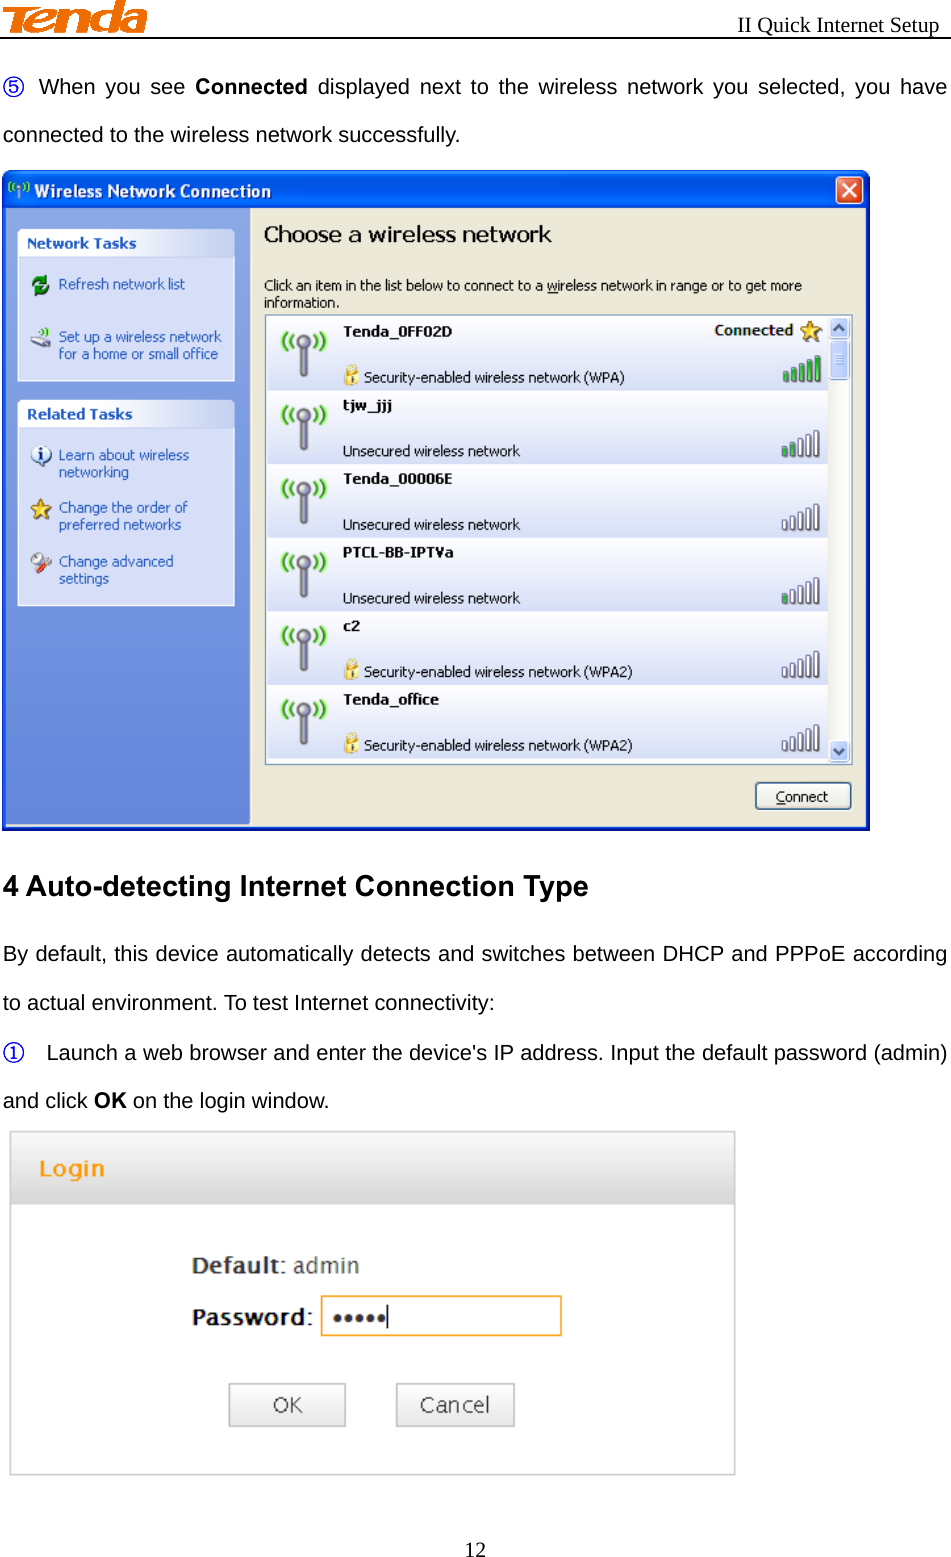                                                       II Quick Internet Setup 12 ⑤  When you see Connected displayed next to the wireless network you selected, you have connected to the wireless network successfully.  4 Auto-detecting Internet Connection Type   By default, this device automatically detects and switches between DHCP and PPPoE according to actual environment. To test Internet connectivity: ① Launch a web browser and enter the device&apos;s IP address. Input the default password (admin) and click OK on the login window.  